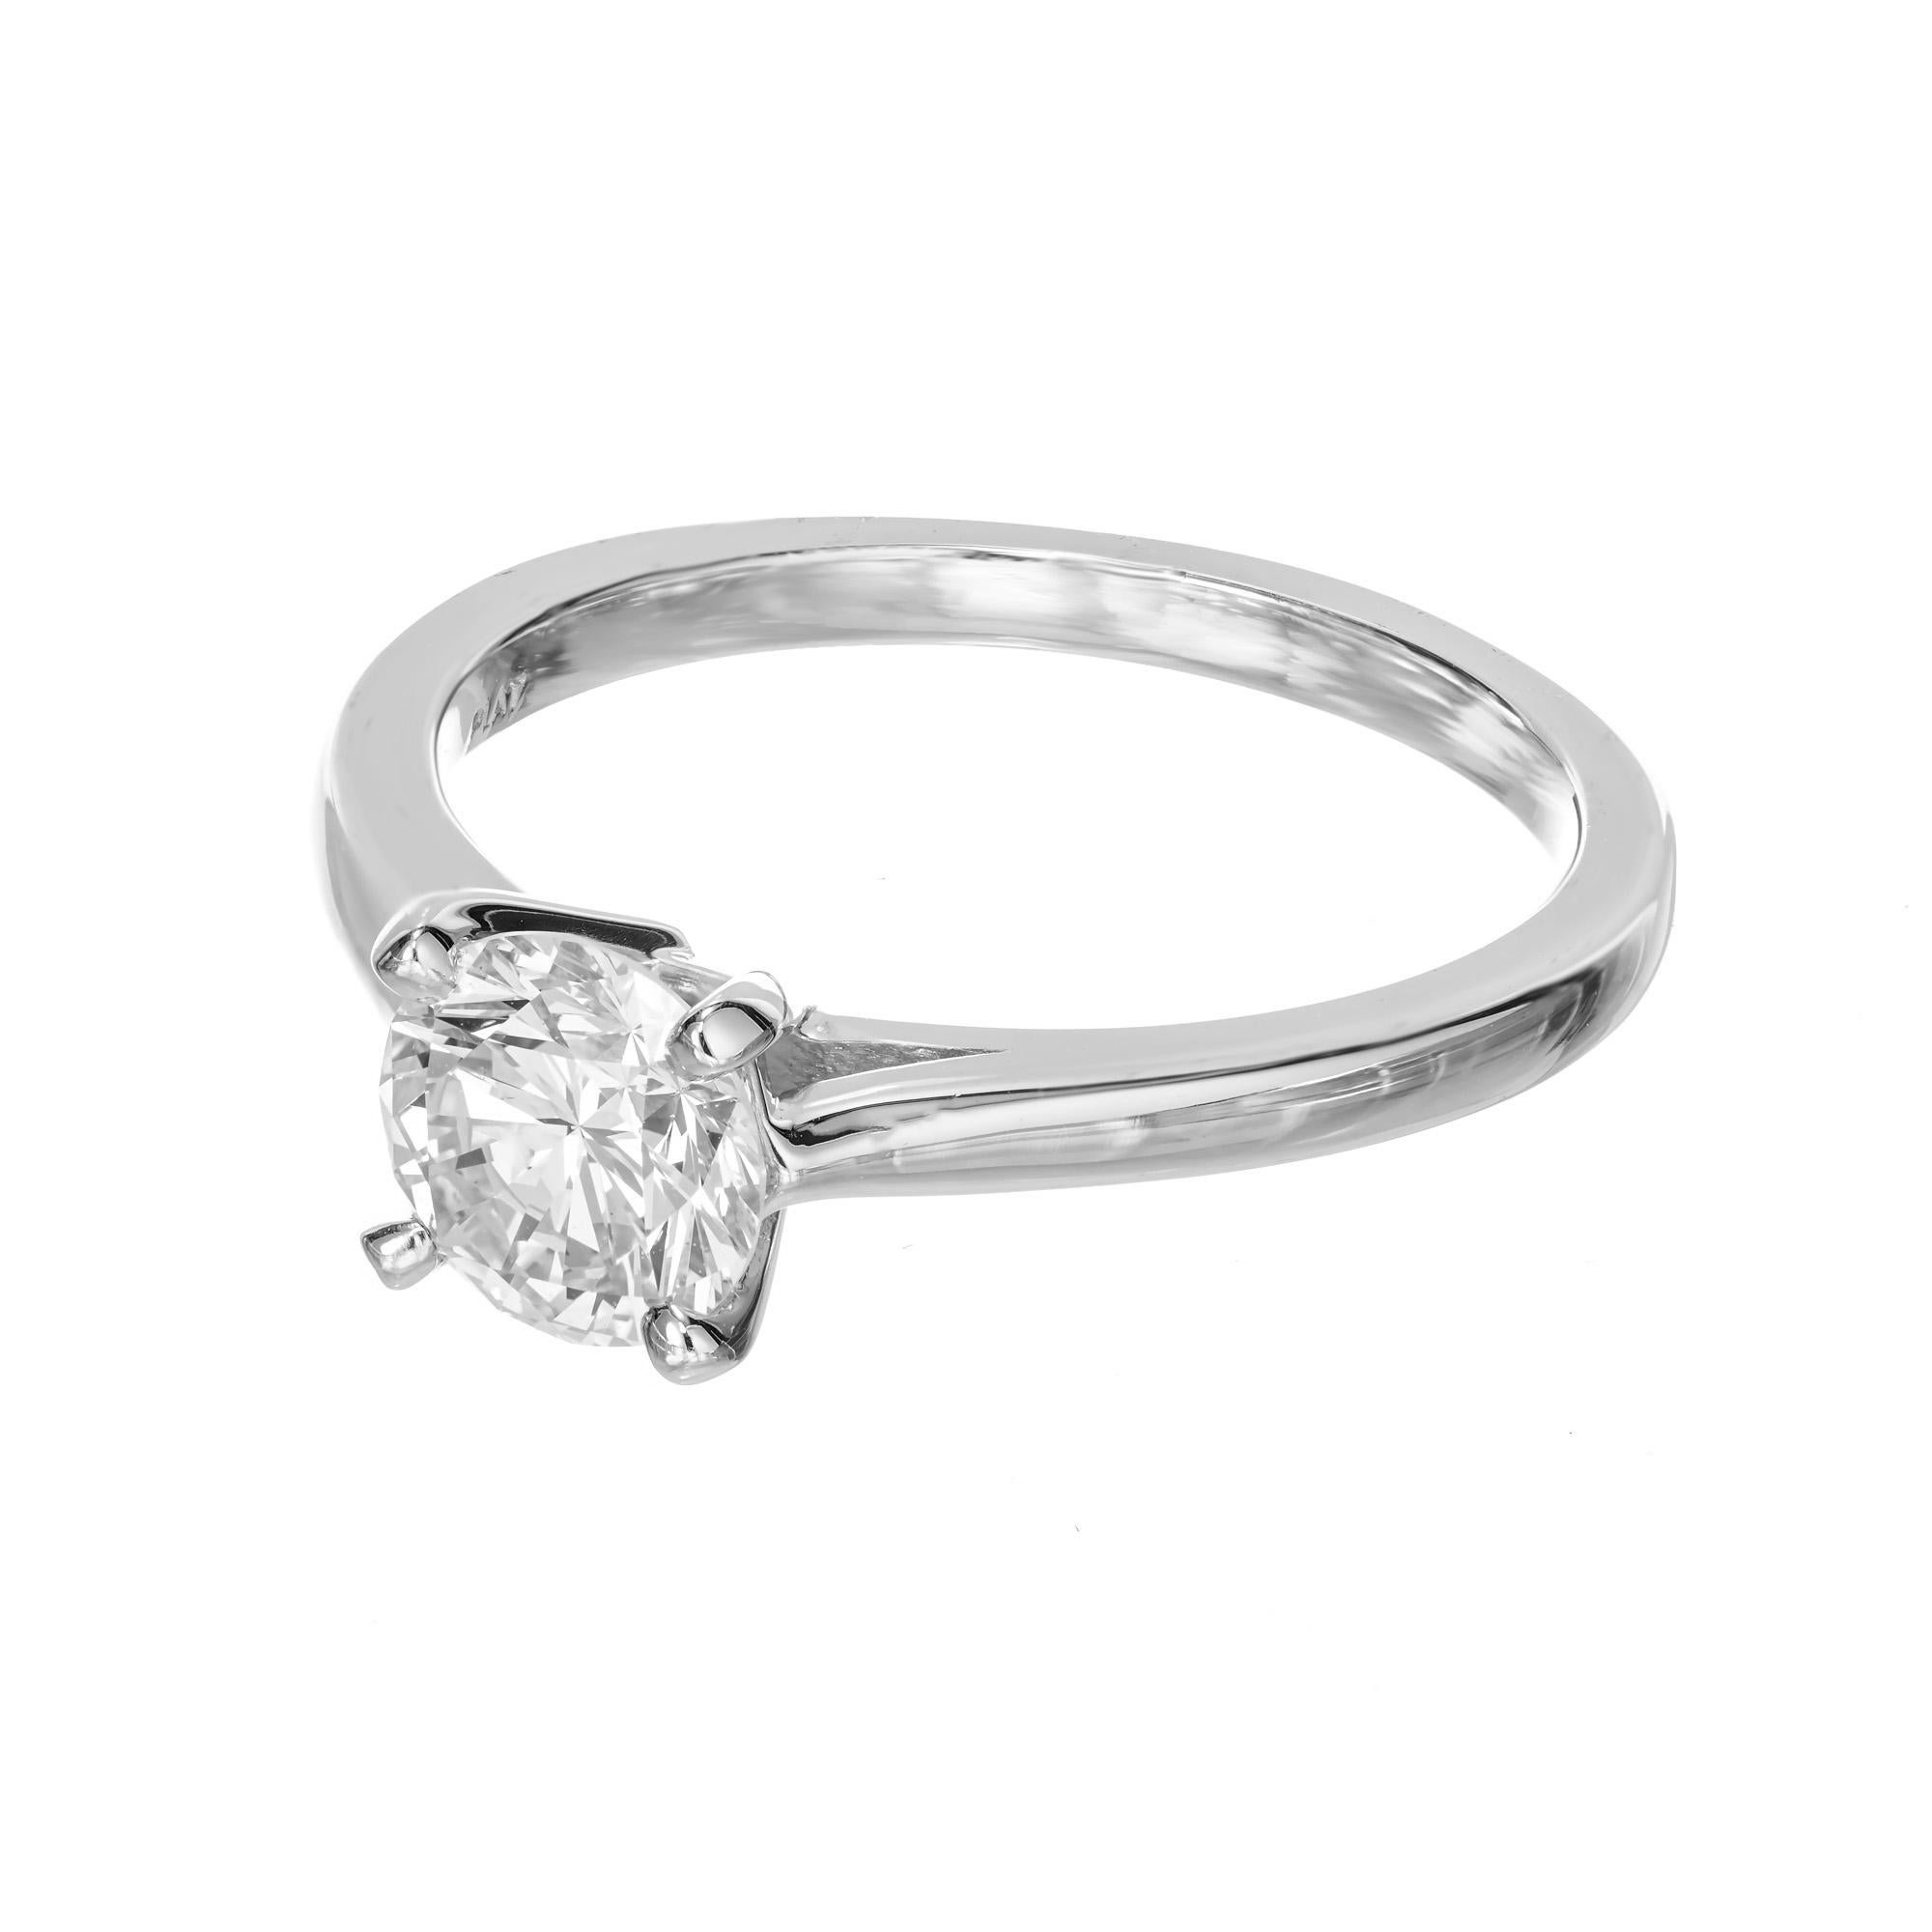 Simple, classic engagement ring with a few special features. First, the diamond is set low to the finger for comfort and safety. Second, the ring is engineered to safely remove the cross bar at the north and south sides of the ring. This allows